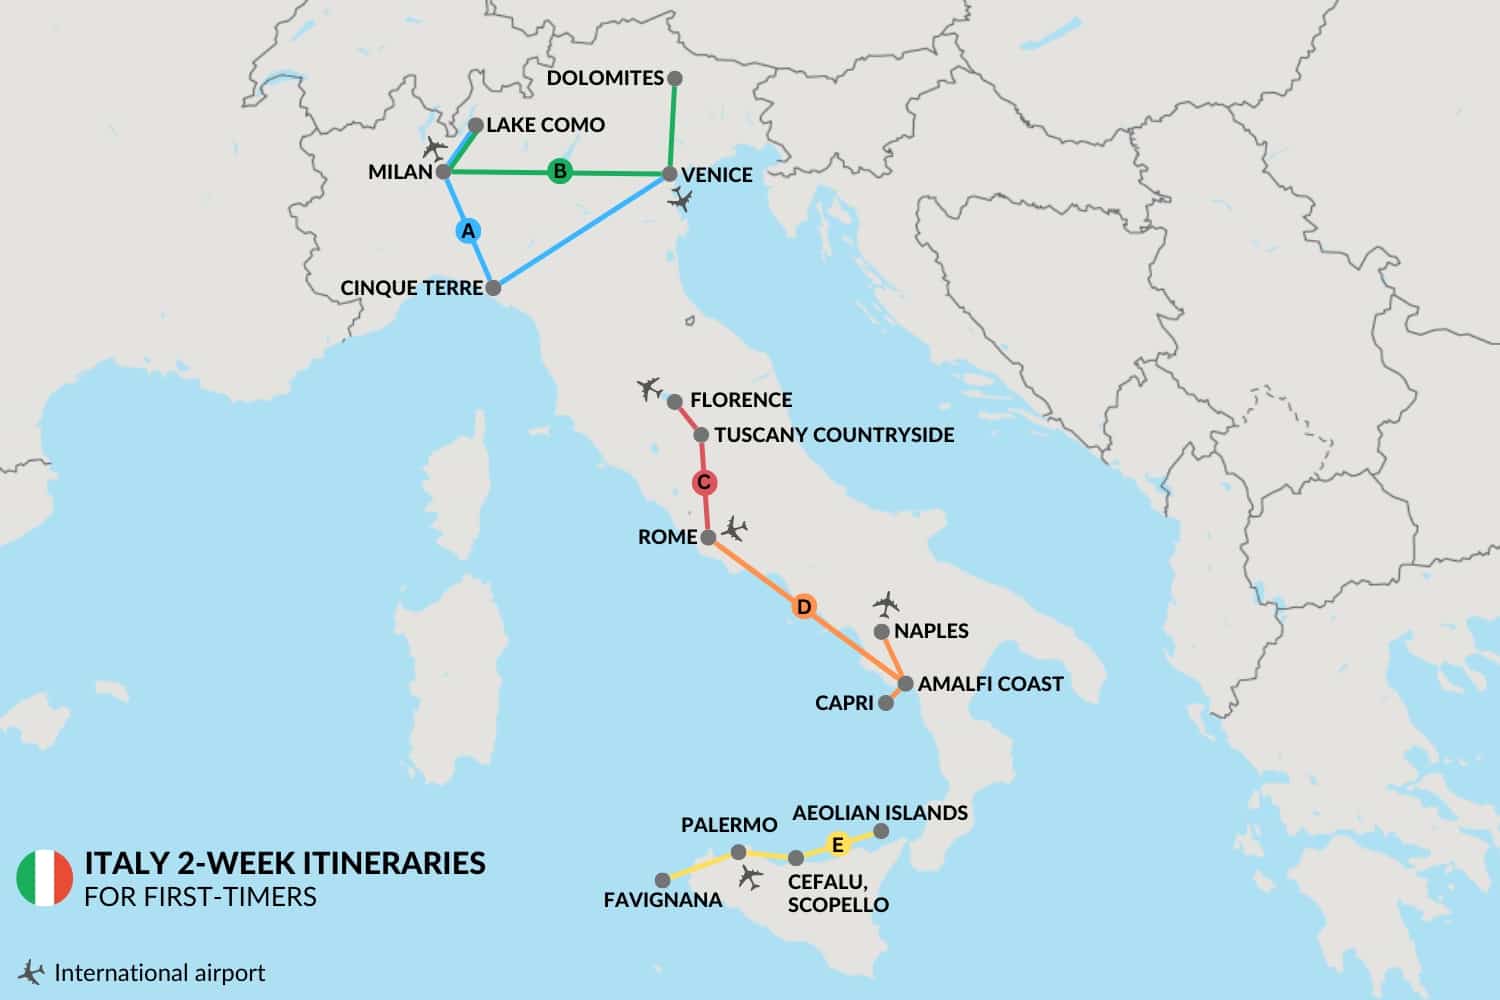 2-Week Italy Itinerary Map First Timers